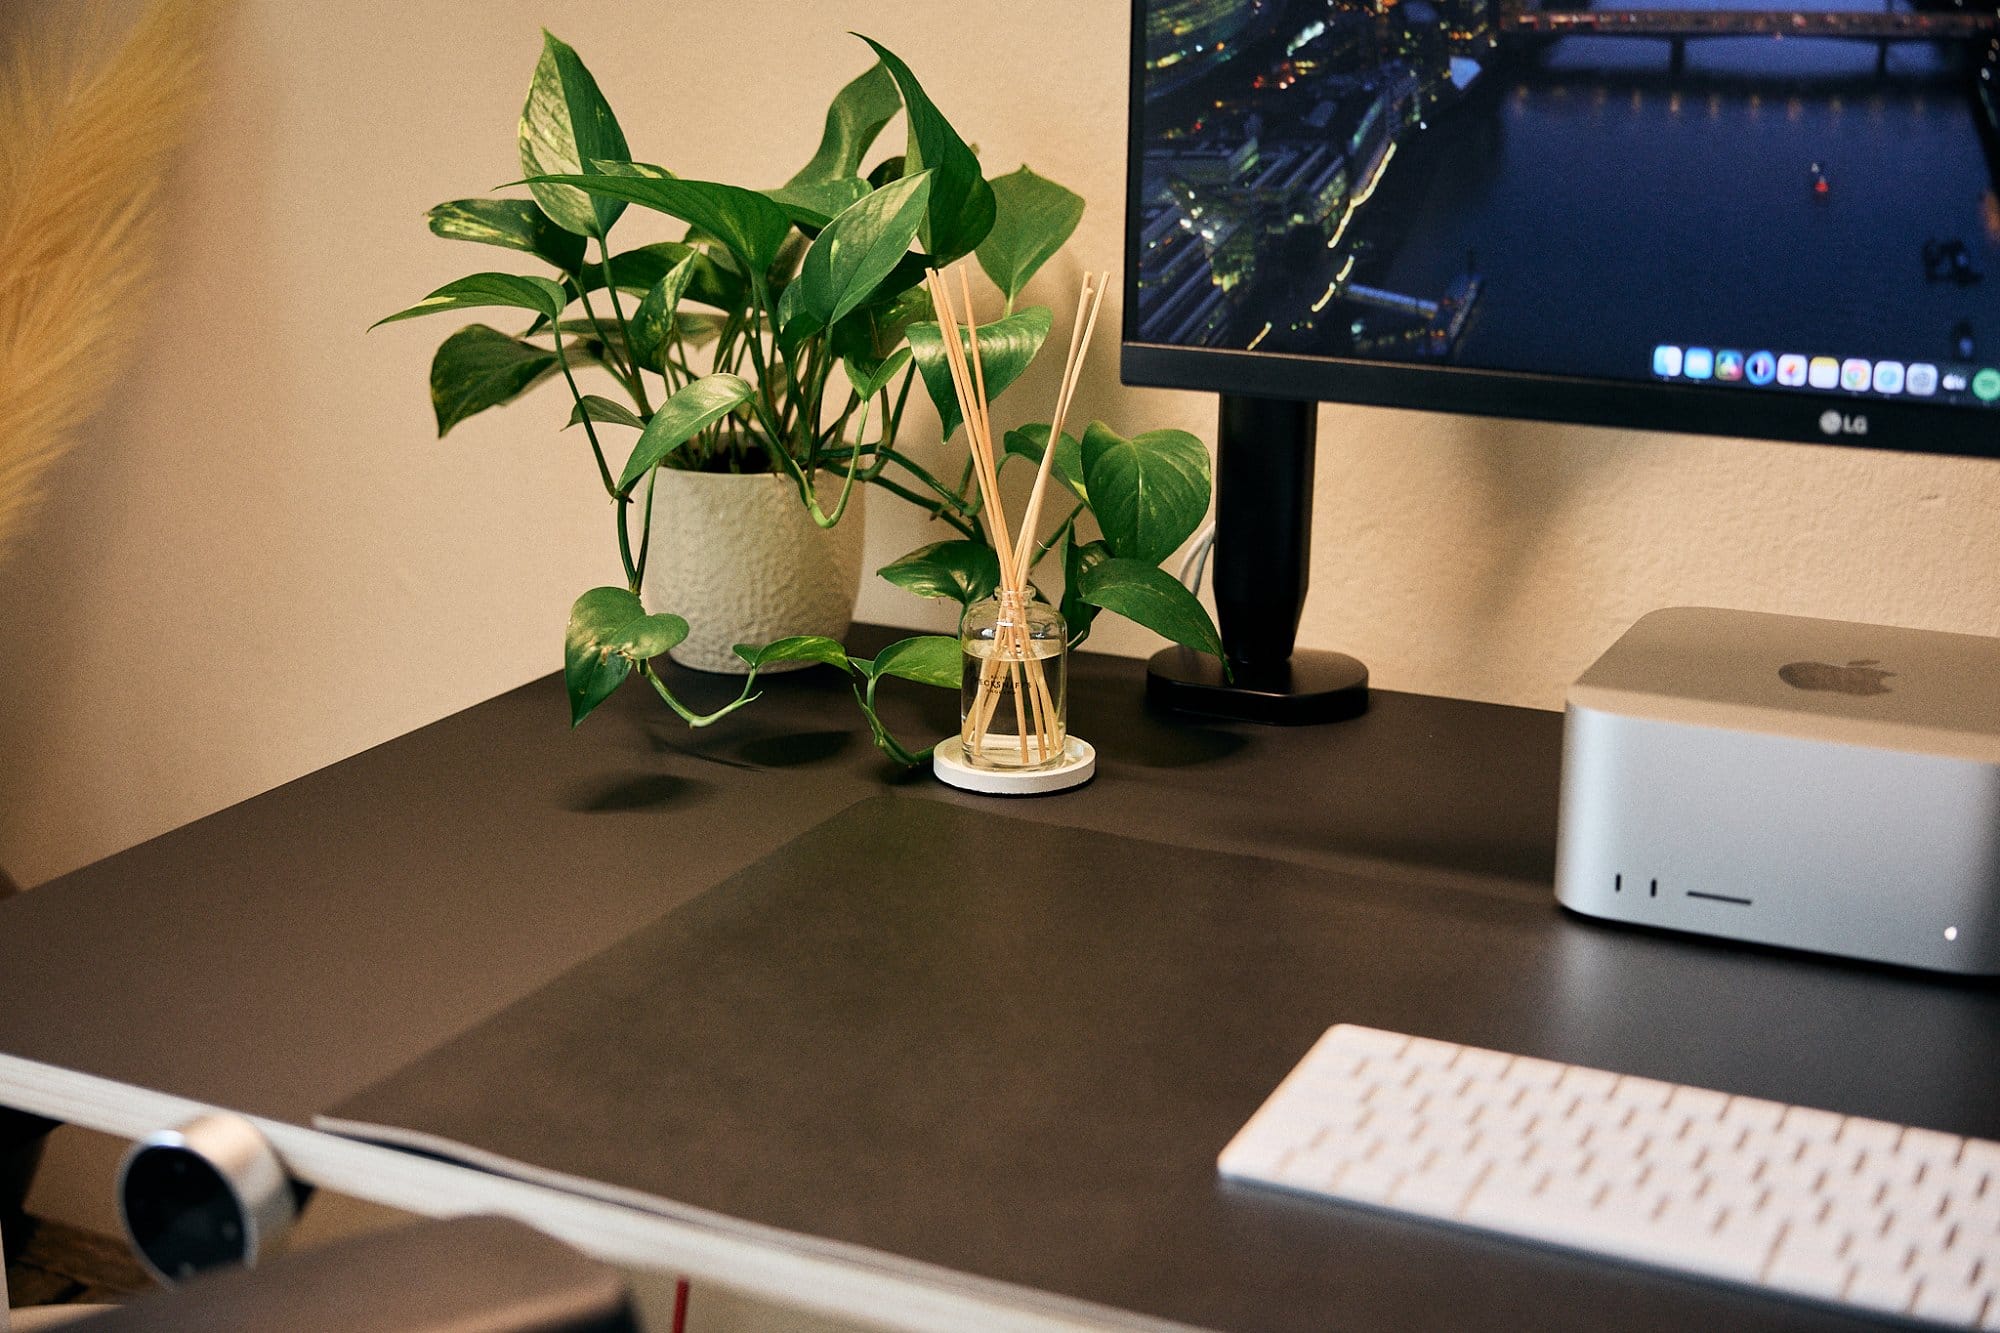 A close-up of a desk with a green potted plant, a reed diffuser, an Apple Mac Studio, a keyboard, and a part of a monitor displaying a nighttime cityscape